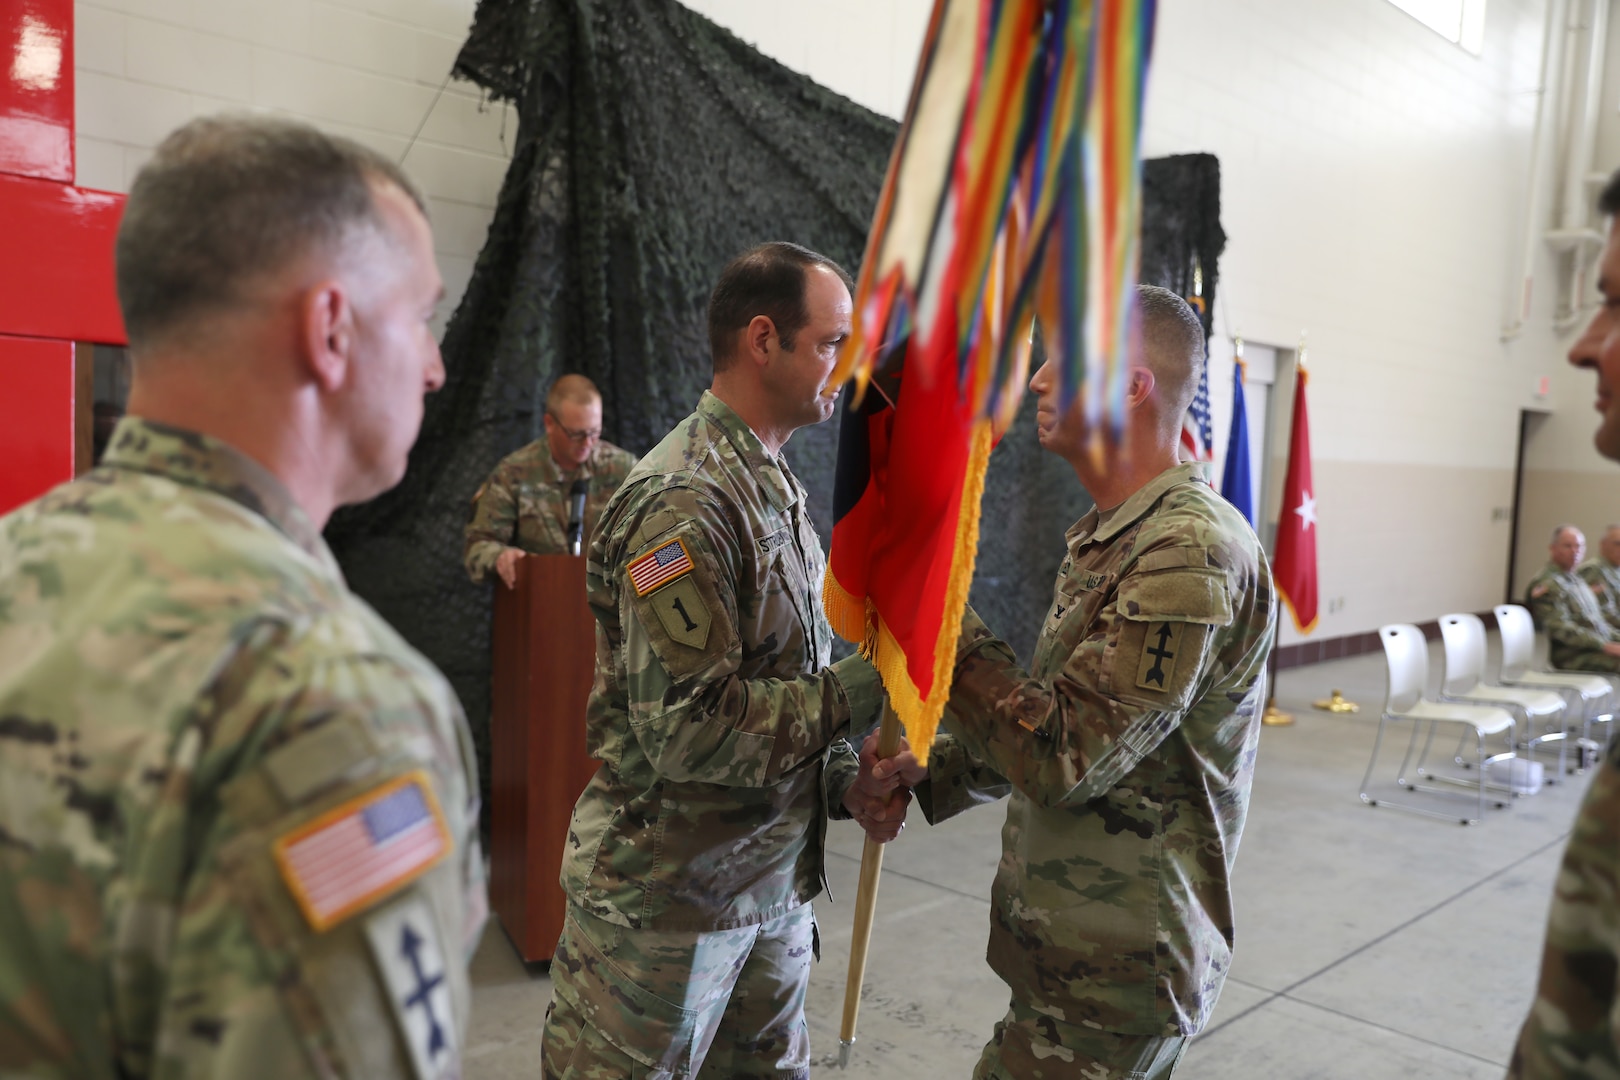 Brig. Gen. Matthew Strub, Wisconsin’s deputy adjutant general for Army, transfers the colors for the Wisconsin Army National Guard’s 32nd “Red Arrow” Infantry Brigade Combat Team to incoming commander Col. Matthew Elder during an Aug. 6 change of command ceremony at the brigade headquarters near Camp Douglas, Wis. The 32nd Brigade is the largest brigade in the Wisconsin Army National Guard, and is a basic, deployable U.S. Army combat unit resembling a small-scale combat division with infantry, cavalry, field artillery and special troops units for intelligence, signal, military police and combat engineers. Wisconsin National Guard photo by Staff Sgt. Kati Volkman